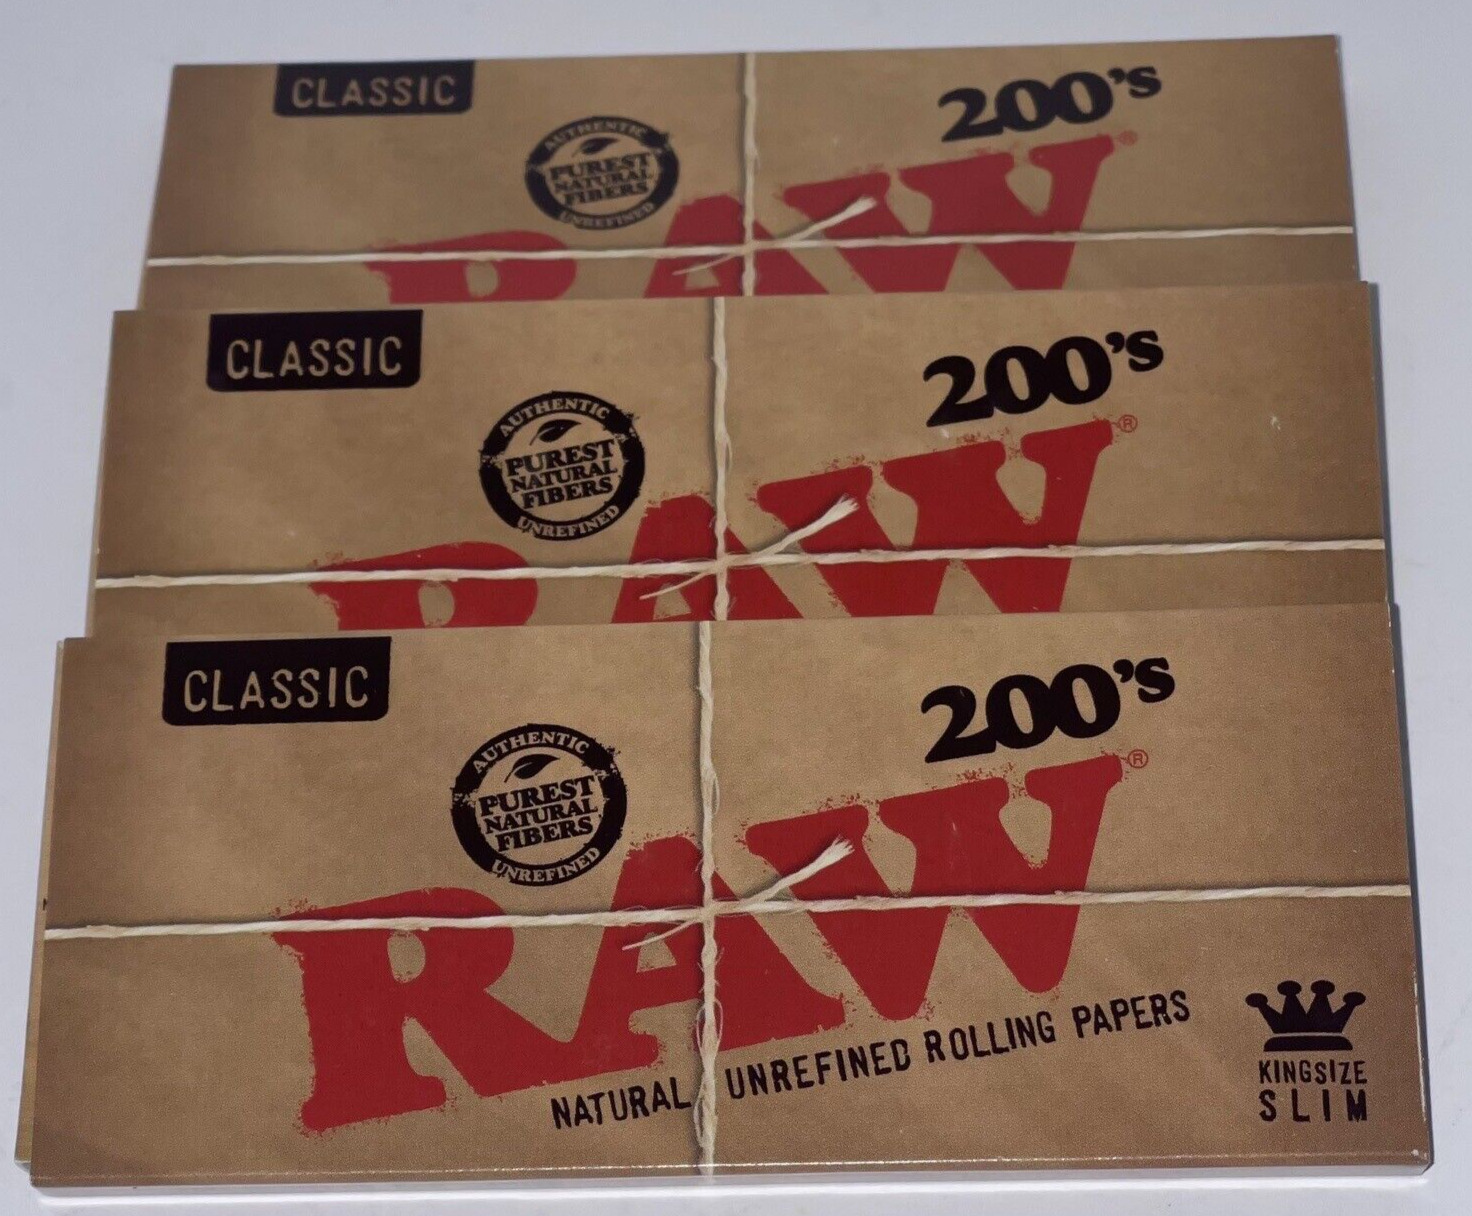 3 Packs RAW 200's Classic King Size Slim Flat Pack, Uncreased Rolling papers